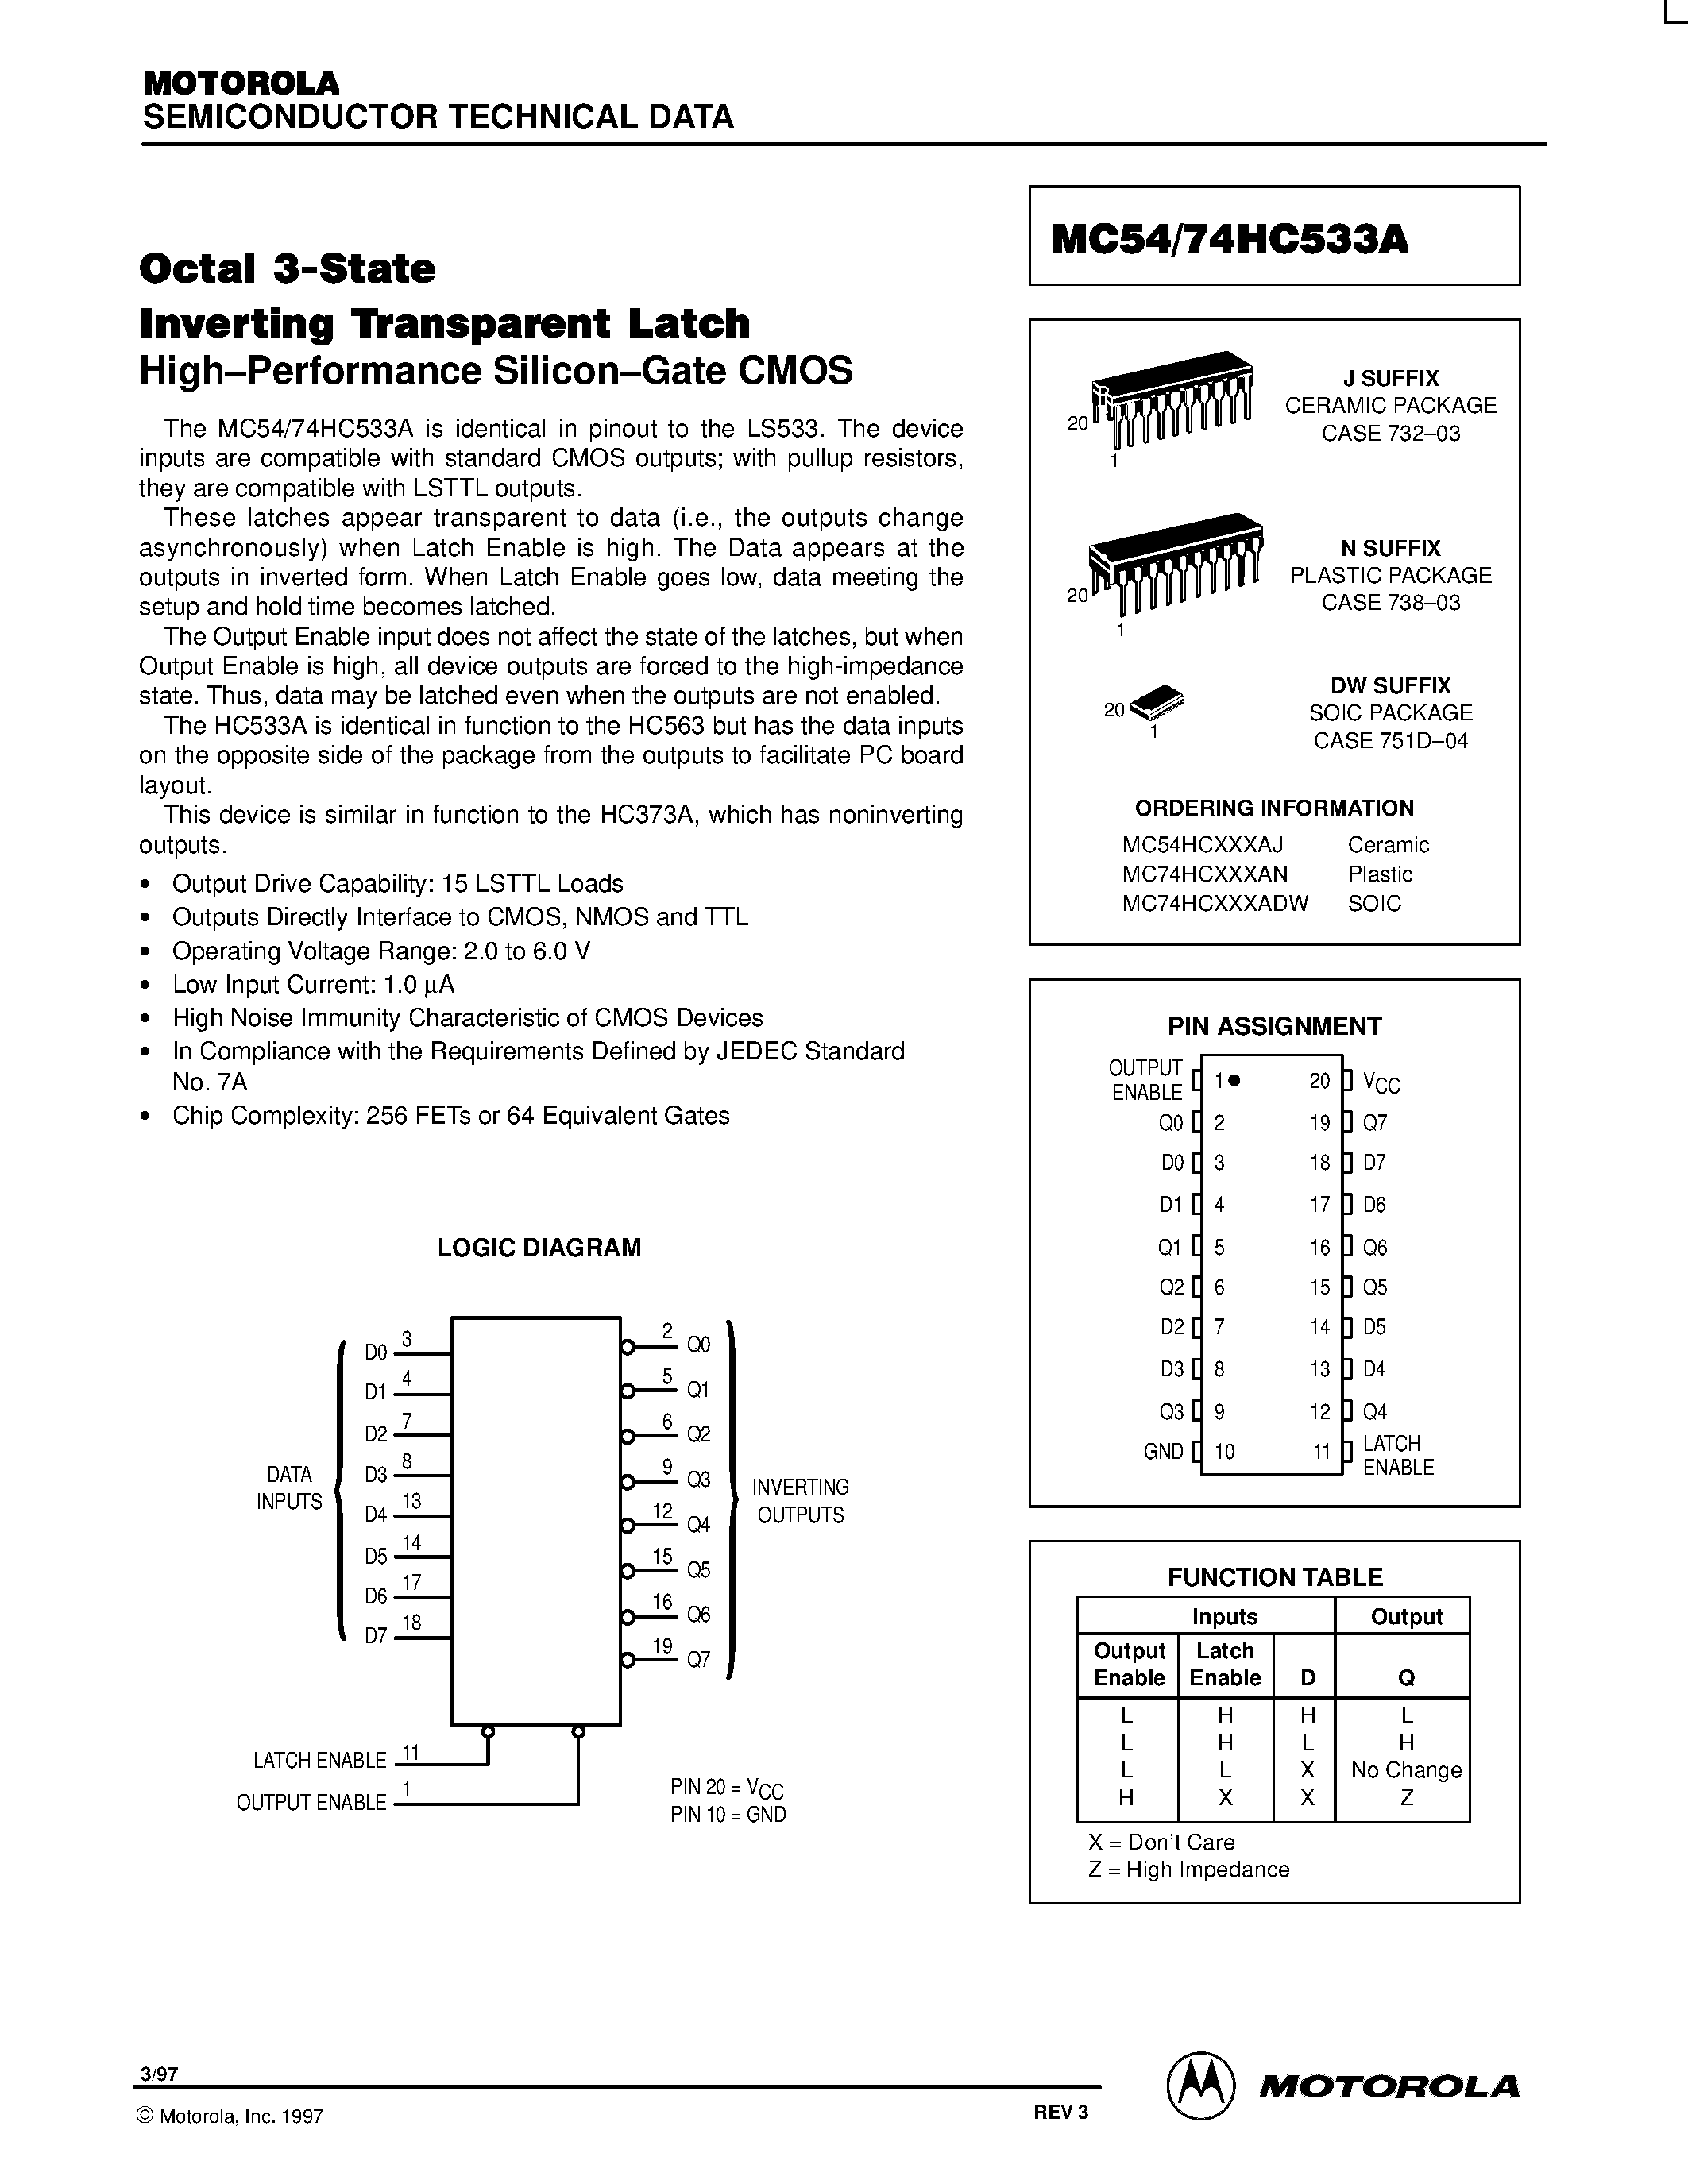 Datasheet MC54HC533A - OCTAL 3-STATE INVERTING TRANSPARENT LATCH HIGH-PERFORMANCE SILICON-GATE CMOS page 1